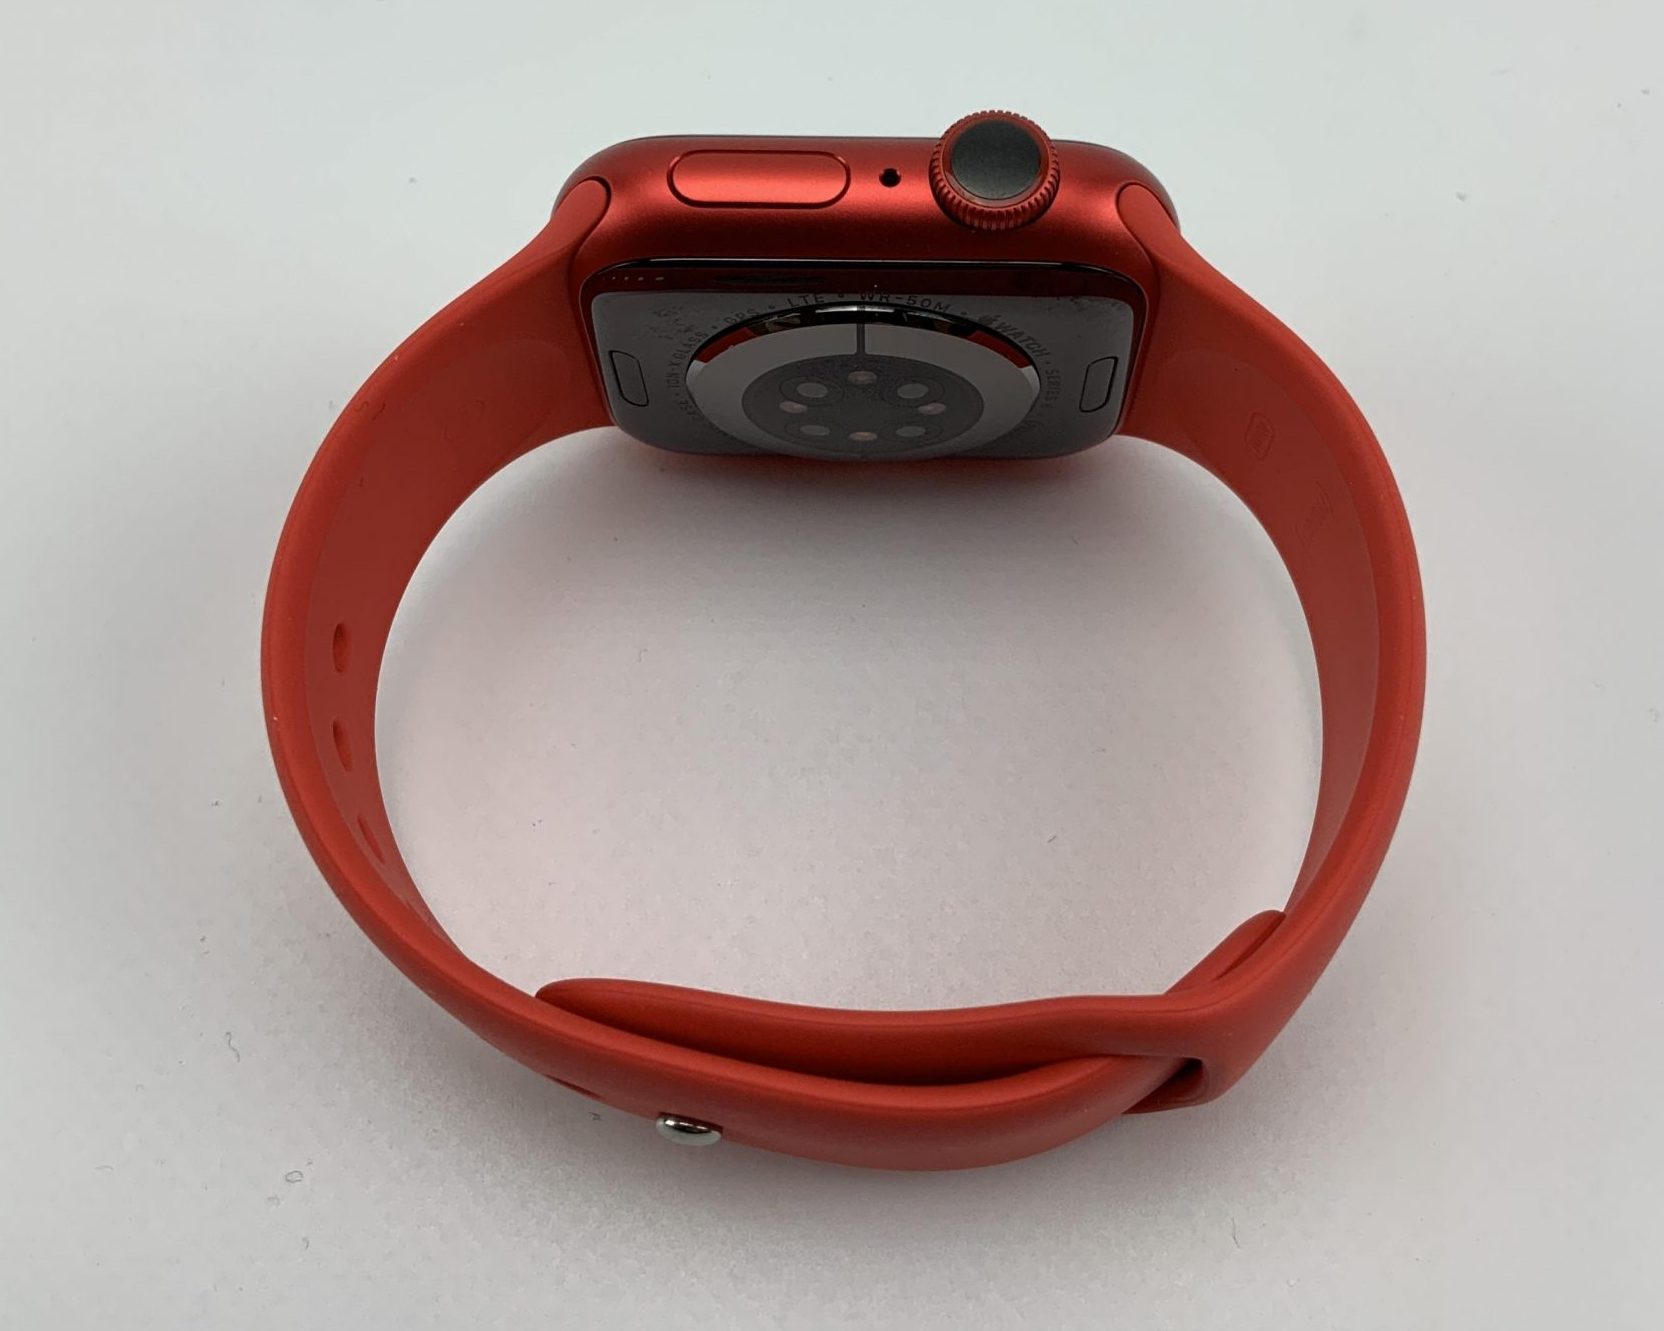 Watch Series 6 Aluminum Cellular (40mm), Red, image 2